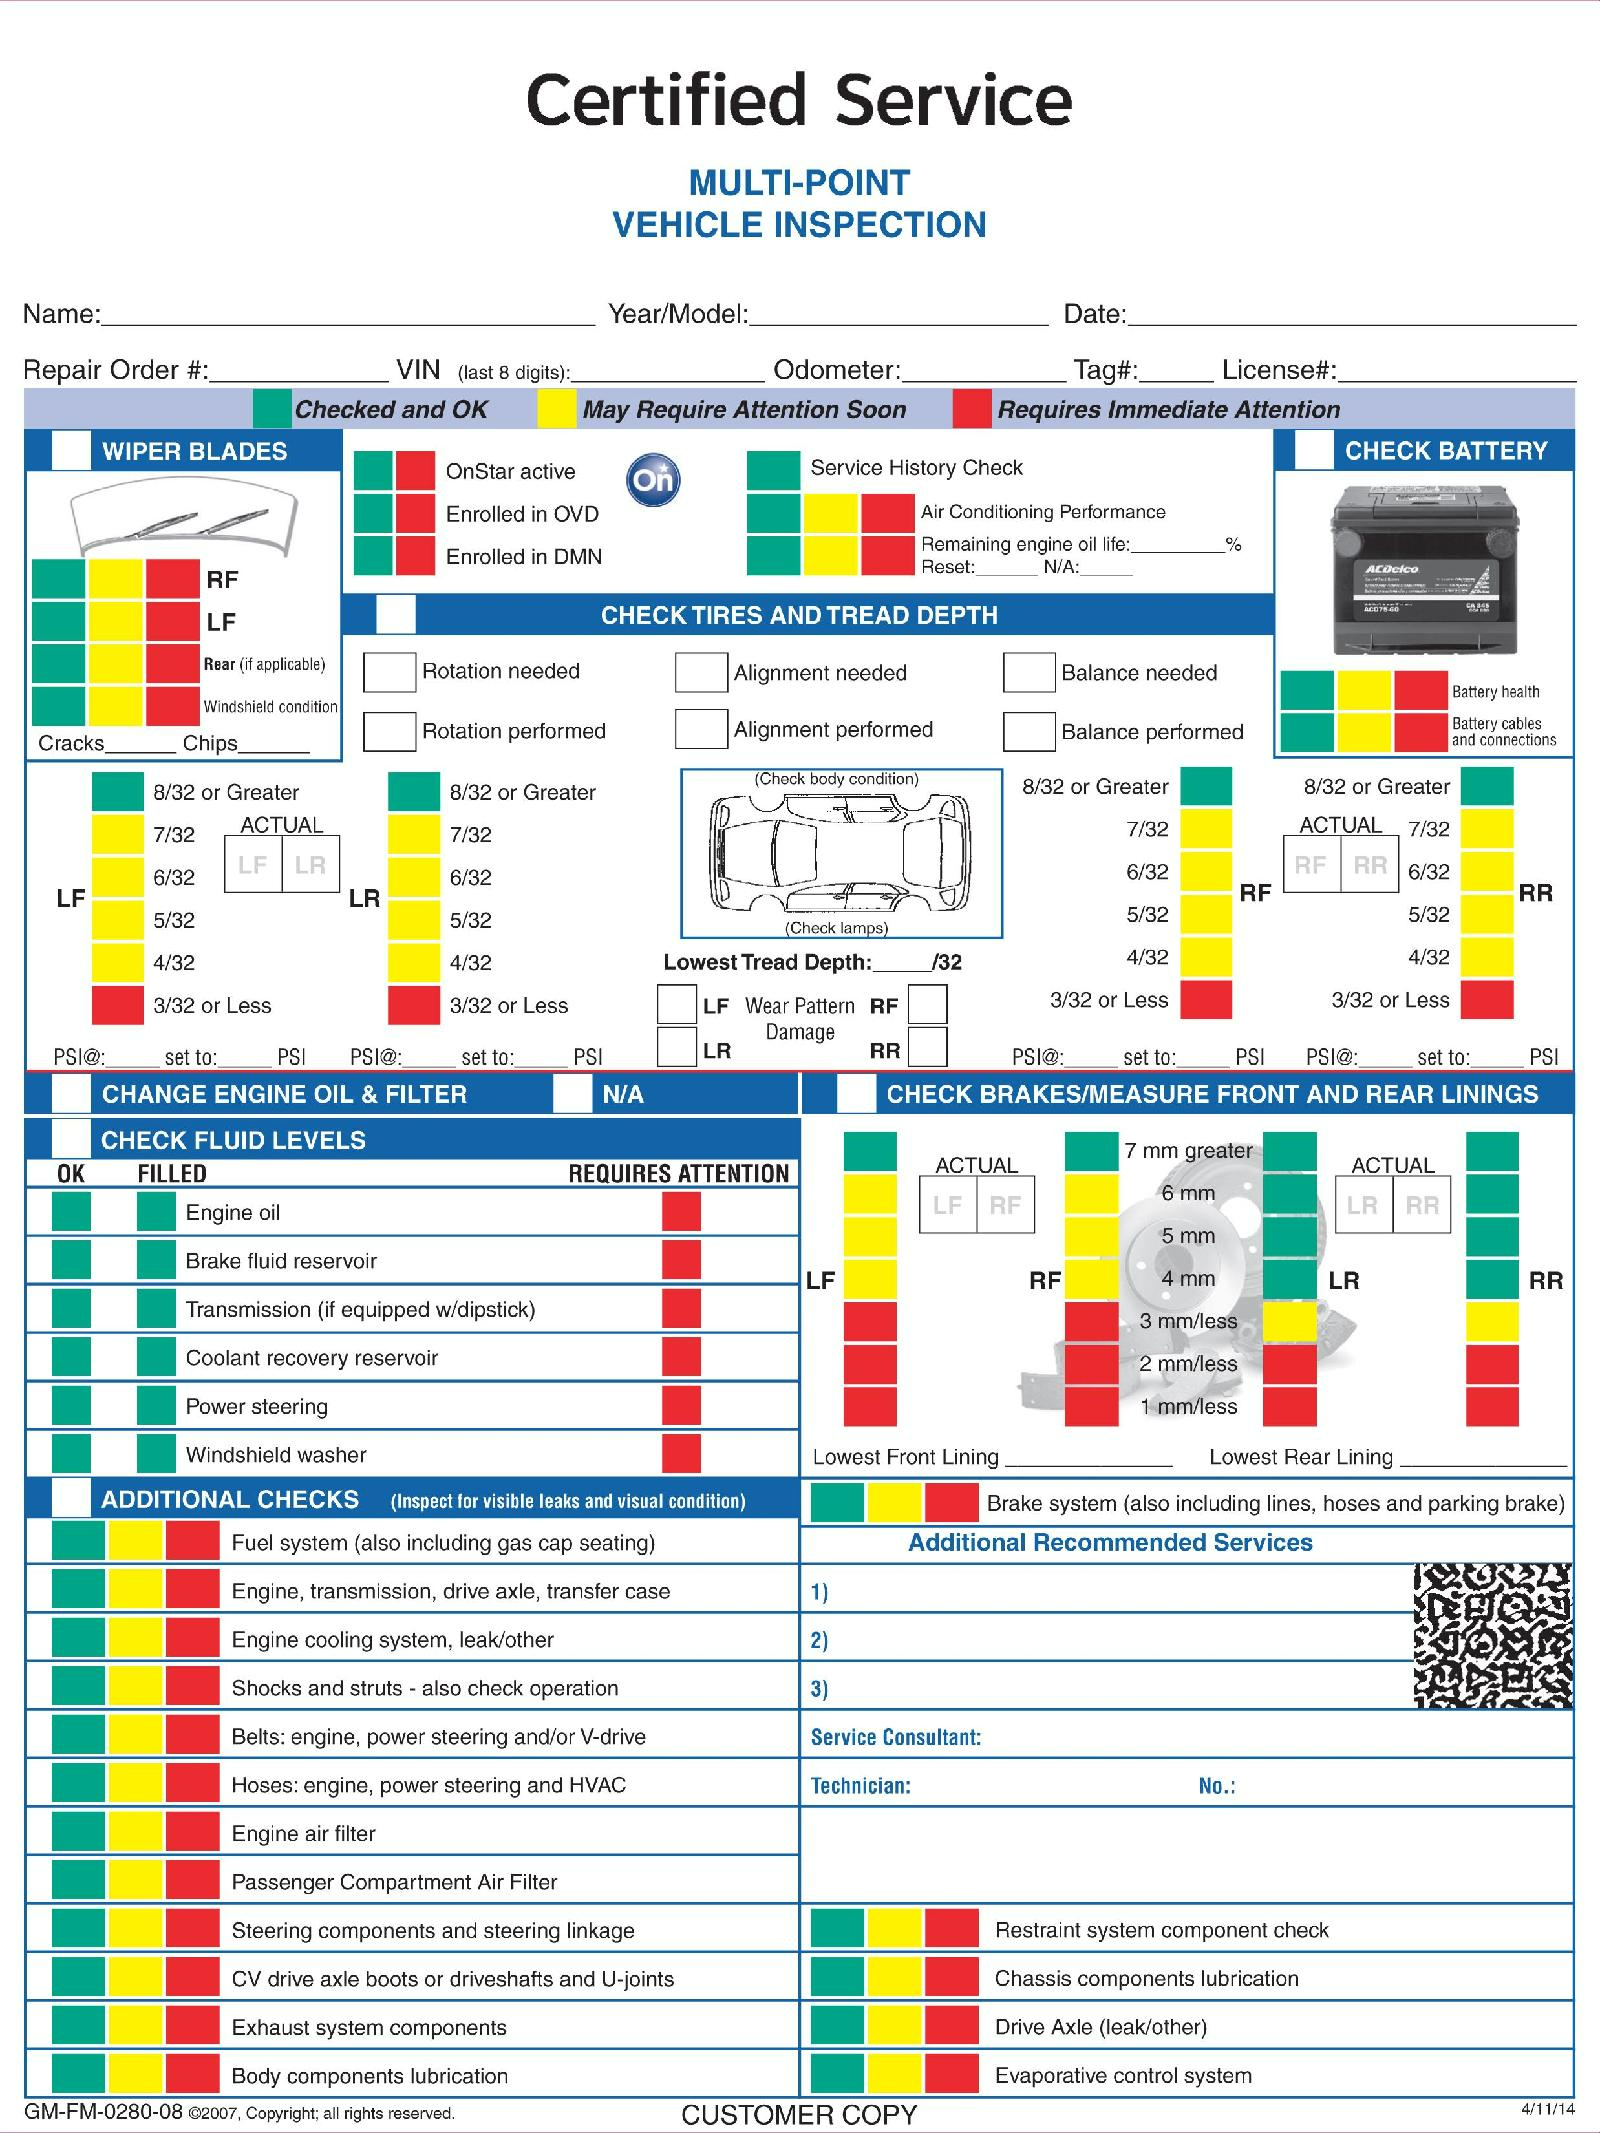 Multi-Point Vehicle Inspection sheet